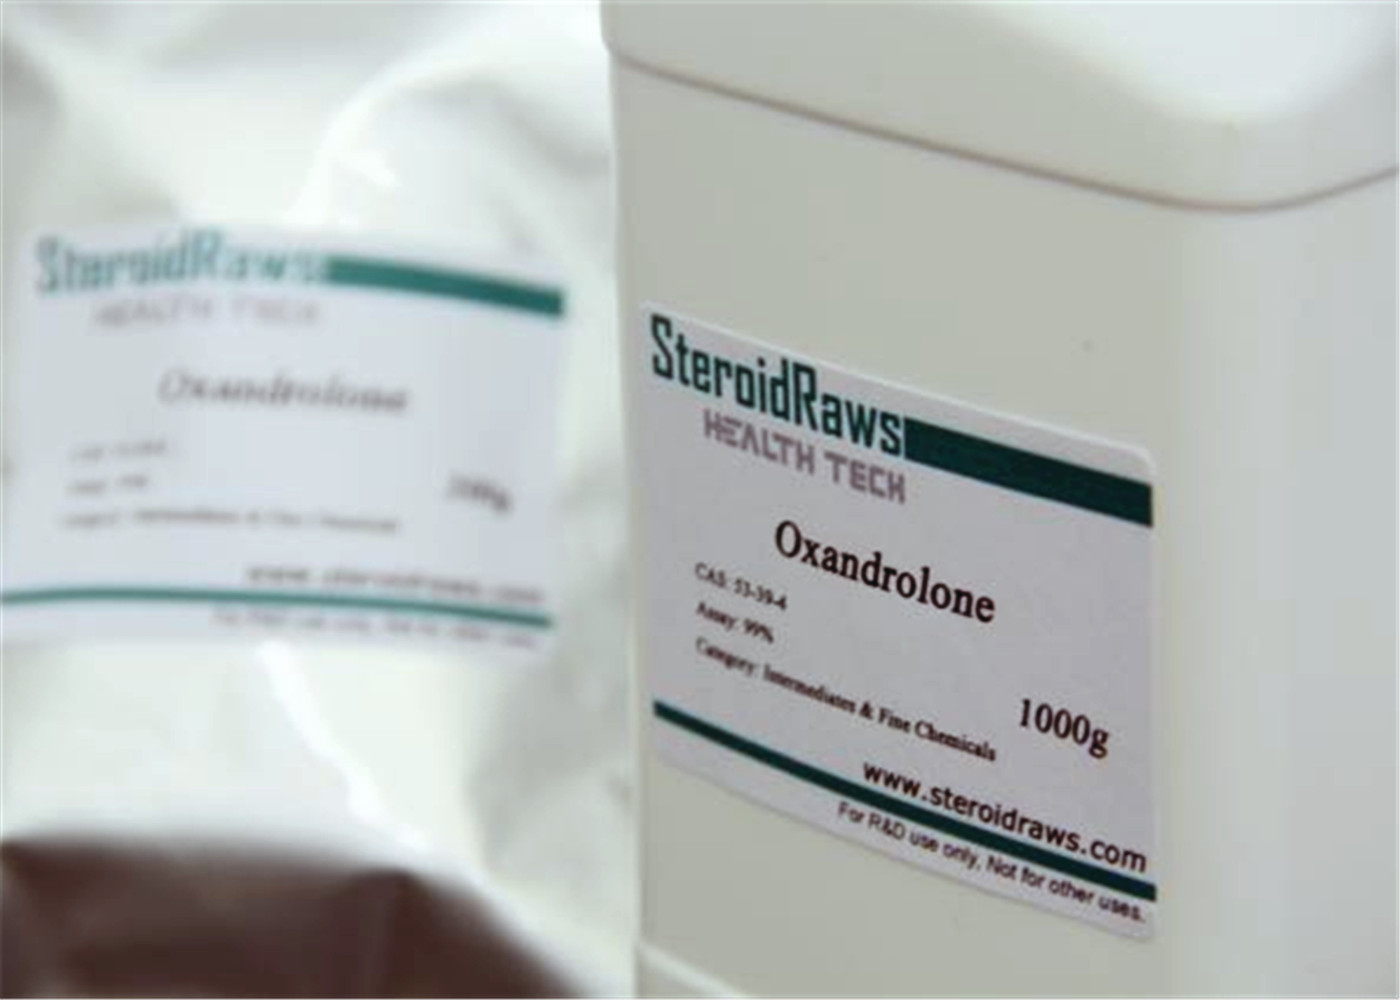 Fat Burning Oxandrolone Anavar Anabolic Steroid Powder 53-39-4 Fat Loss Lean Muscle Mass